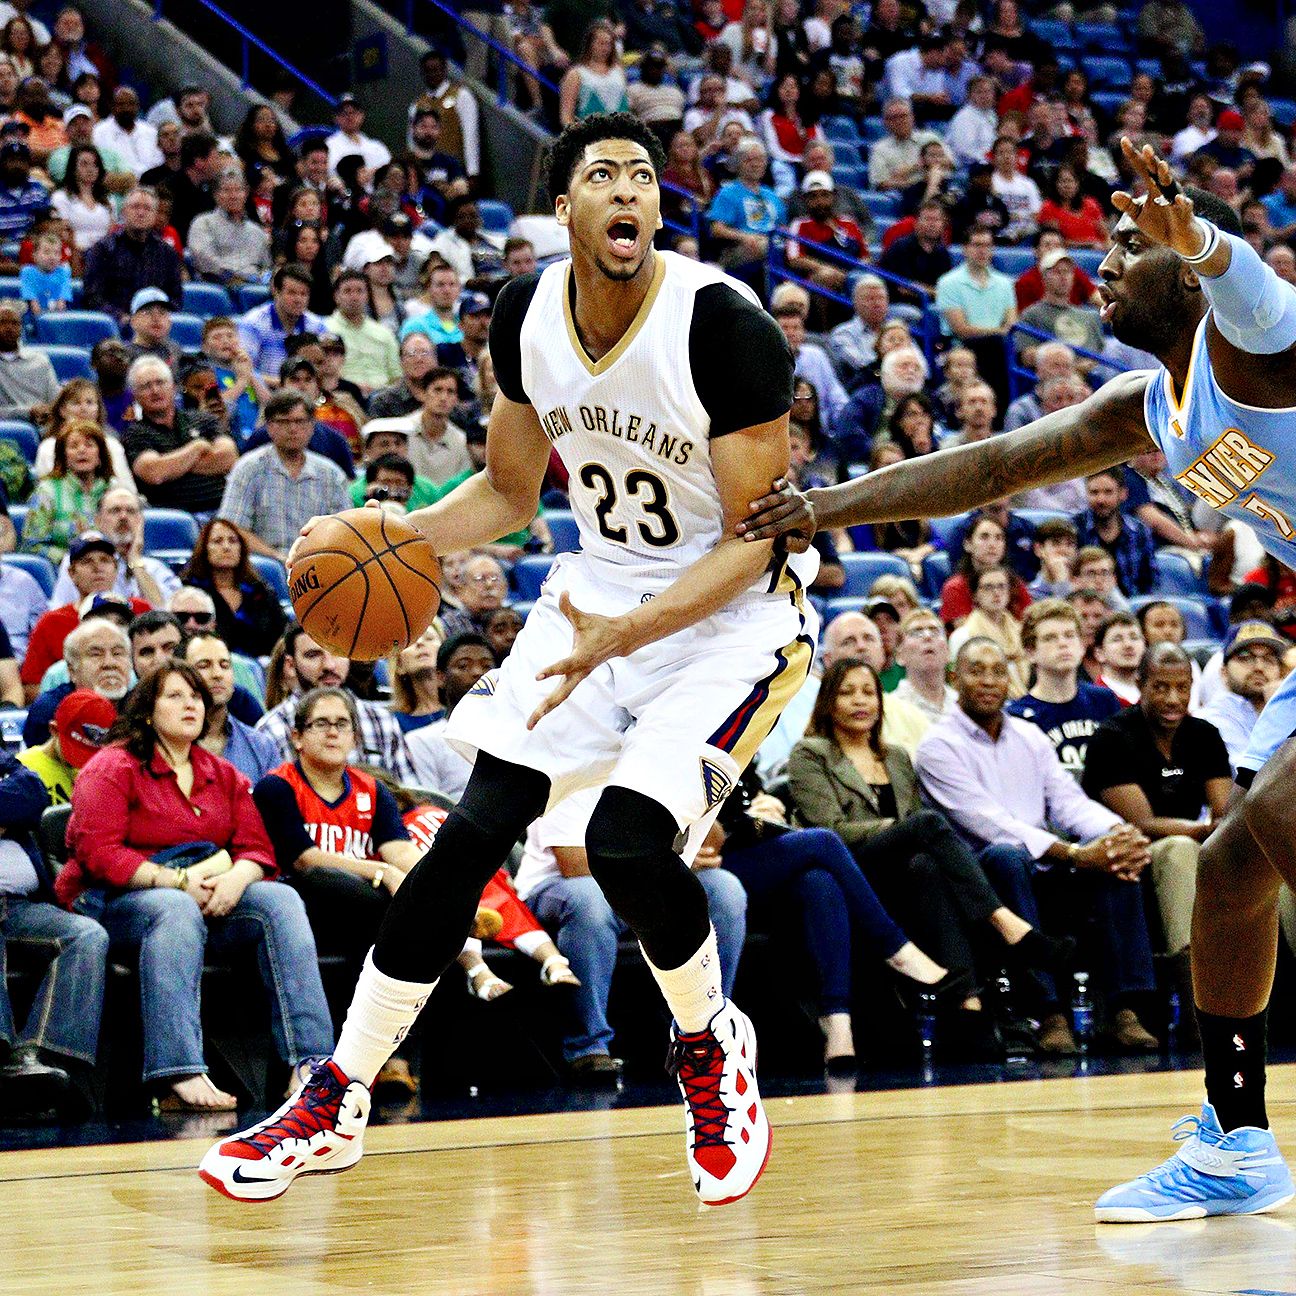 Anthony Davis of New Orleans Pelicans records historic scoreline in loss